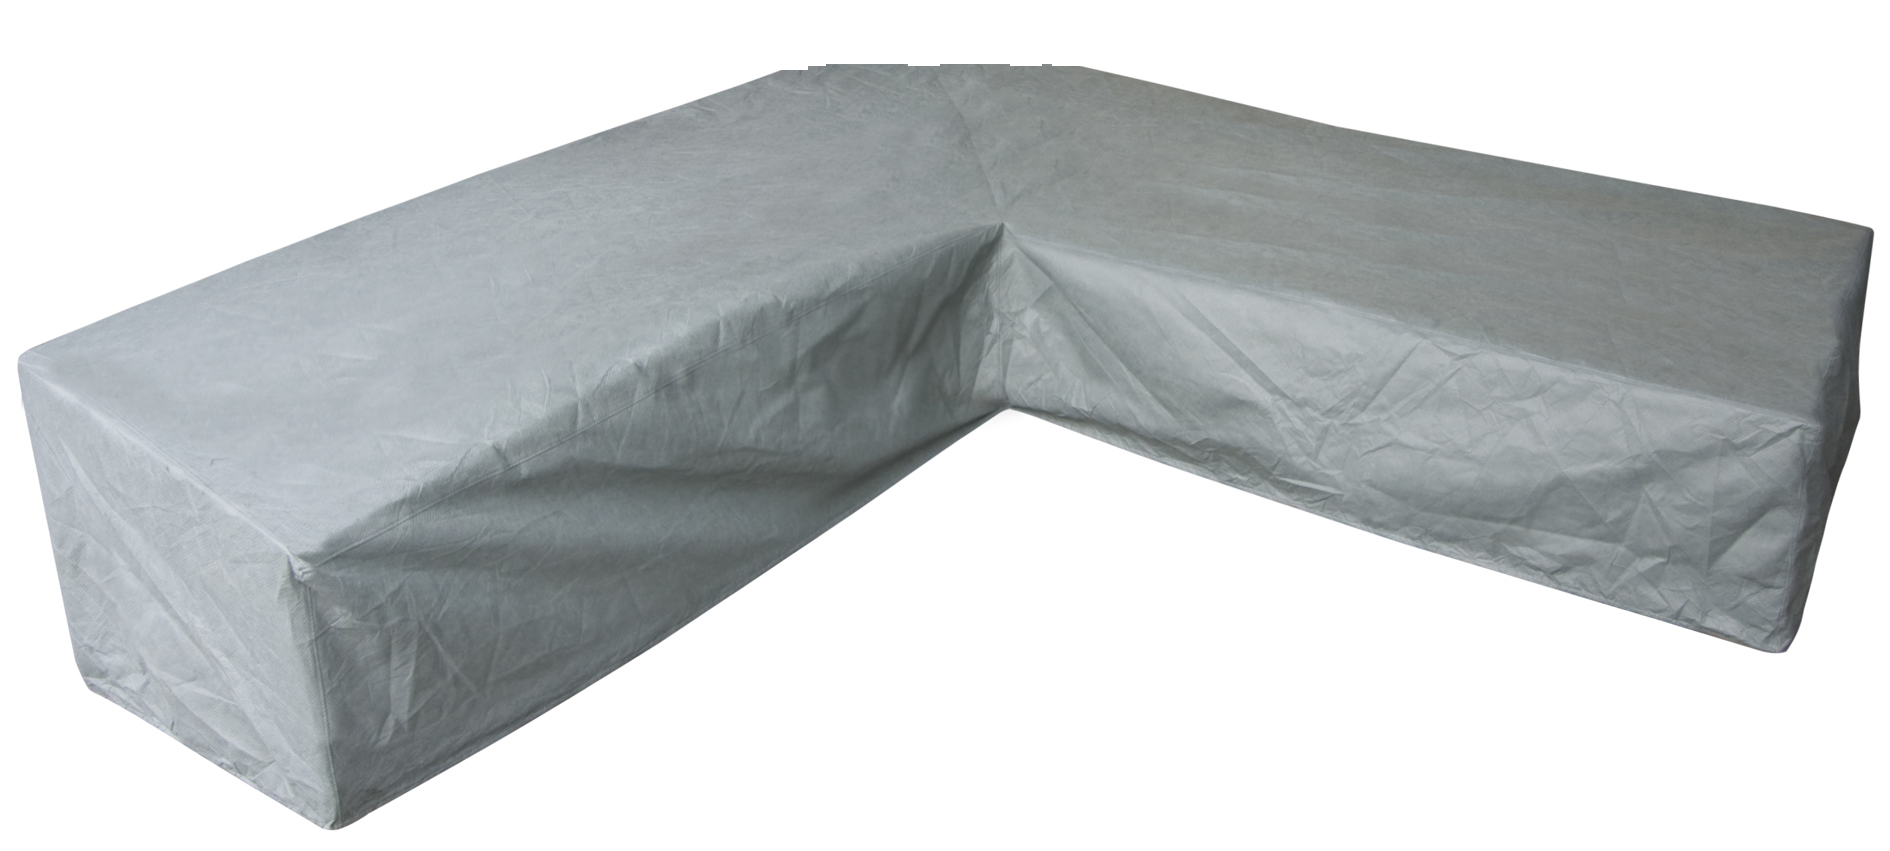 L-shaped dining sofa cover 300 x 300 H: 90 / 60 cm